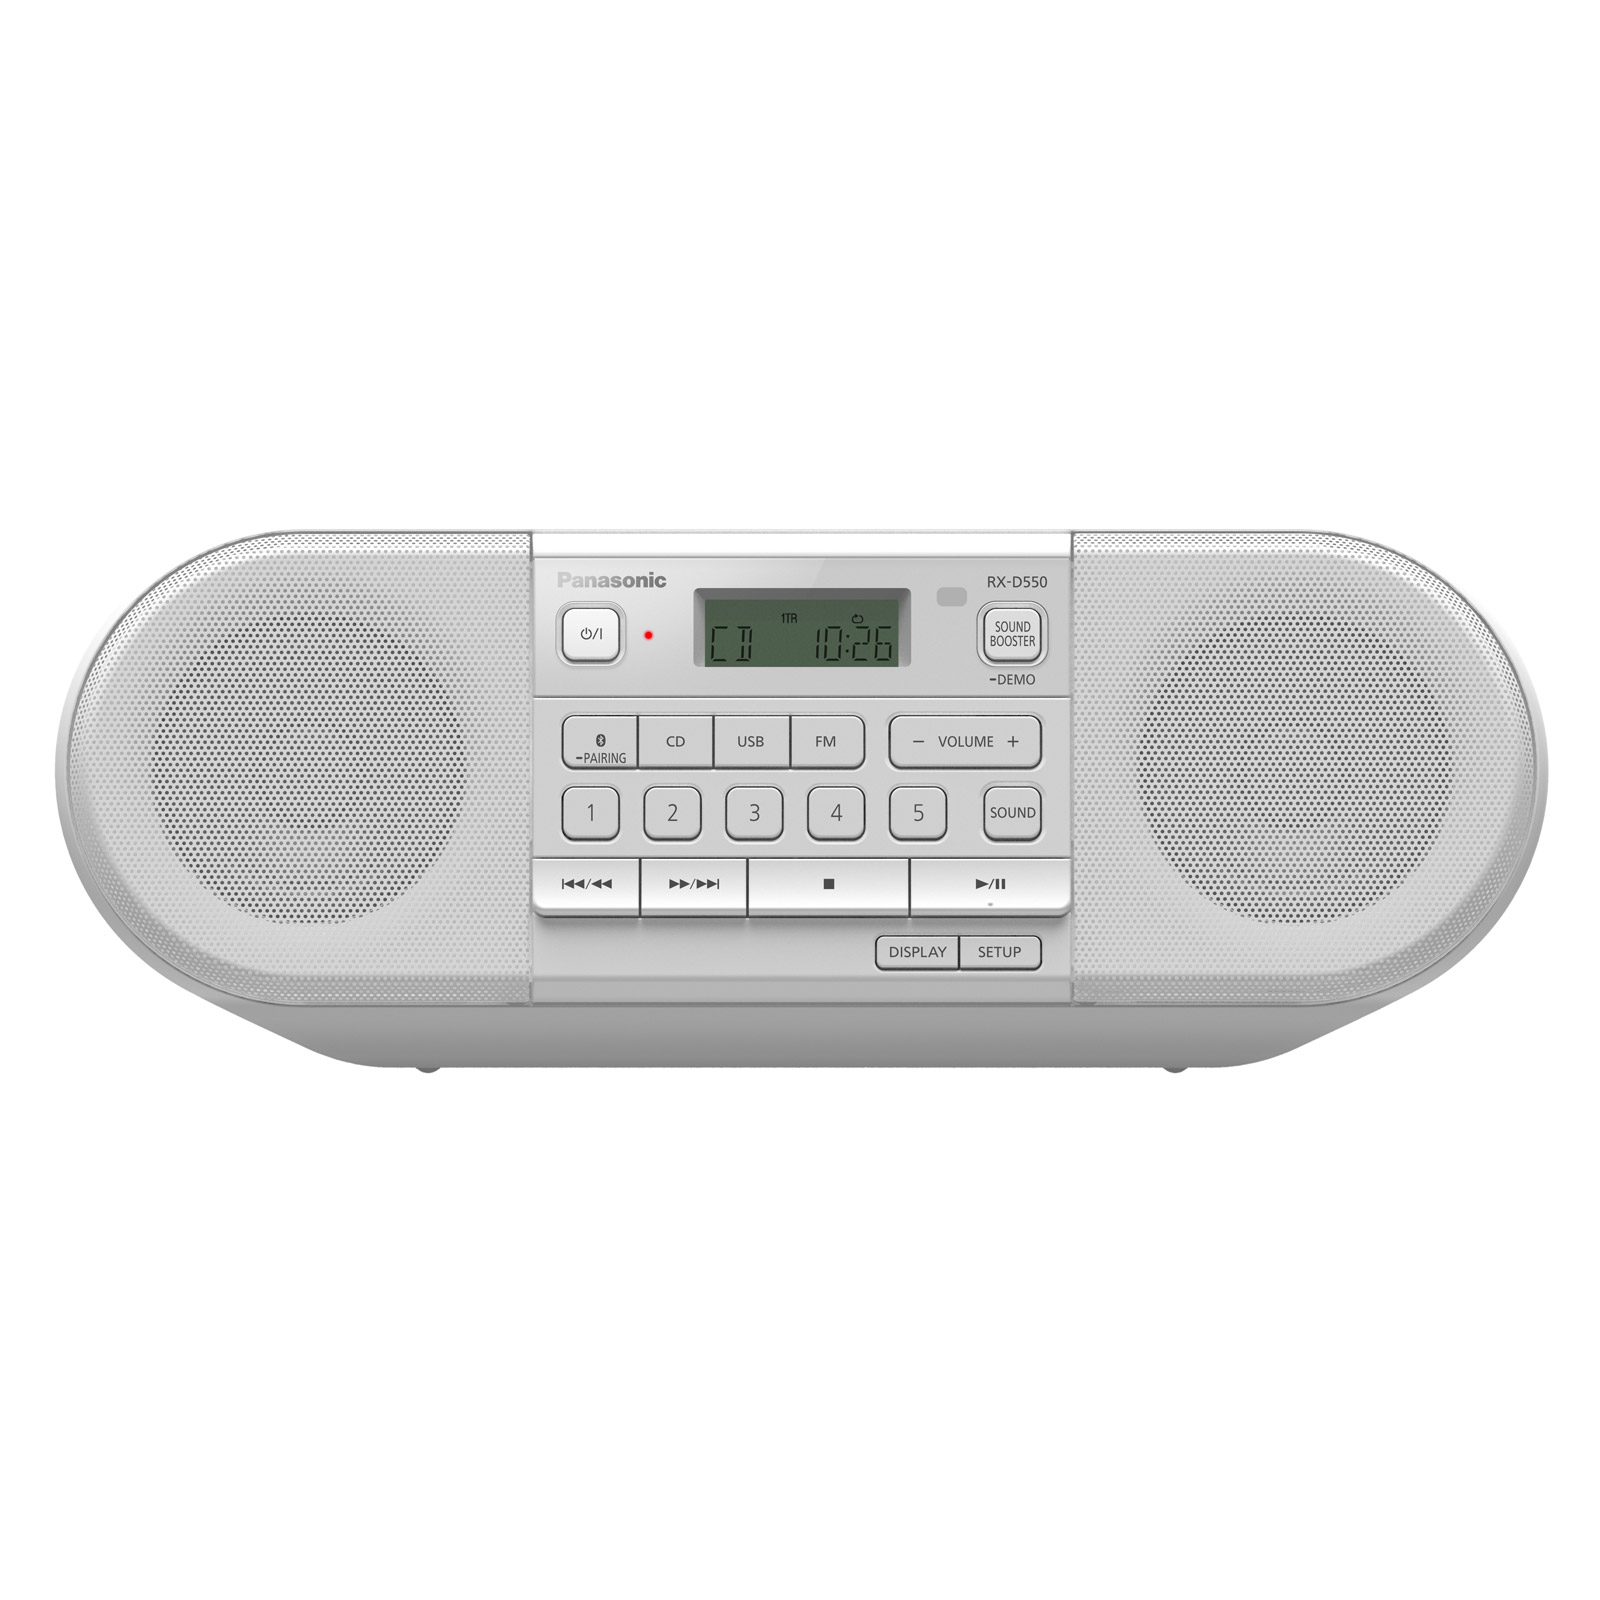 Image of Panasonic RX D550E W Portable Stereo CD System in White FM Bluetooth U